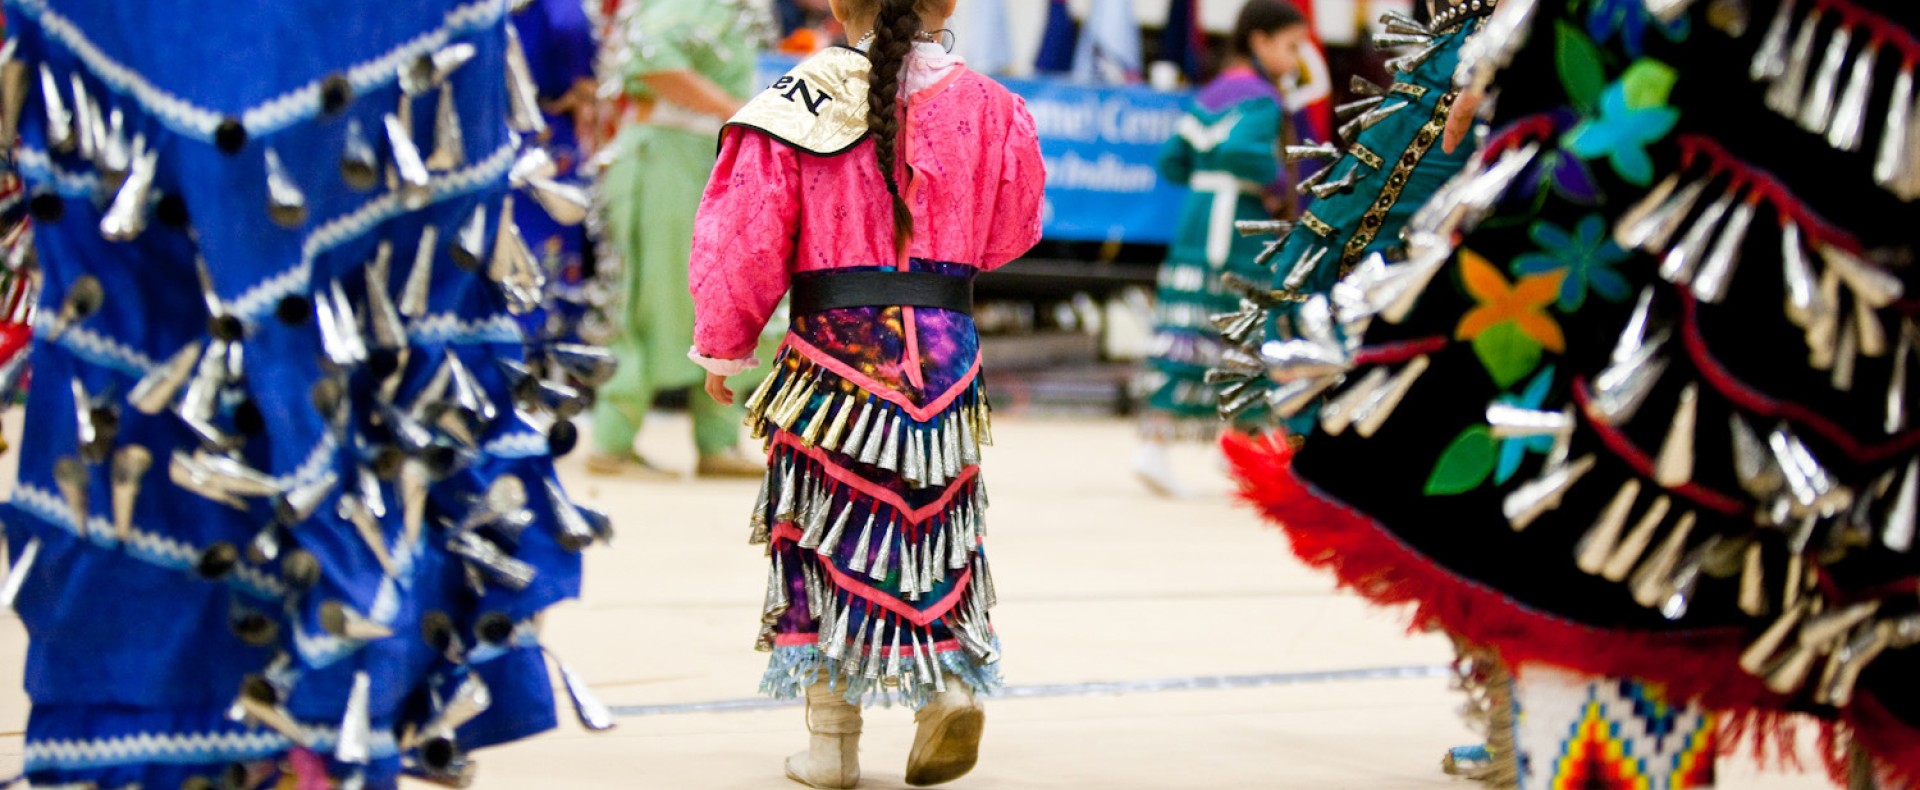 Youth-focused jingle dress picture at Powwow